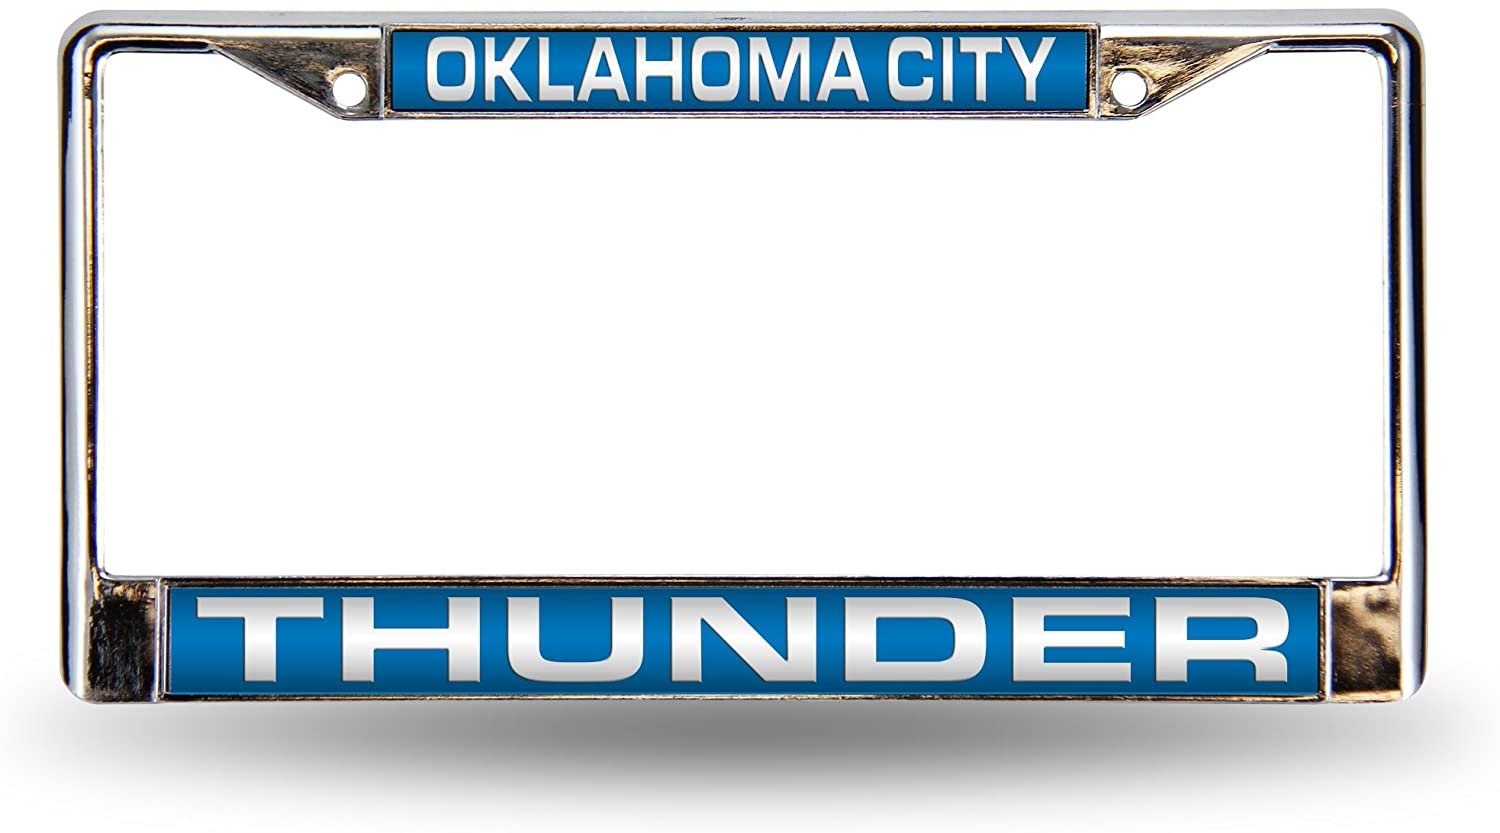 Oklahoma City Thunder Metal License Plate Frame Chrome Tag Cover, Laser Acrylic Mirrored Inserts, 12x6 Inch